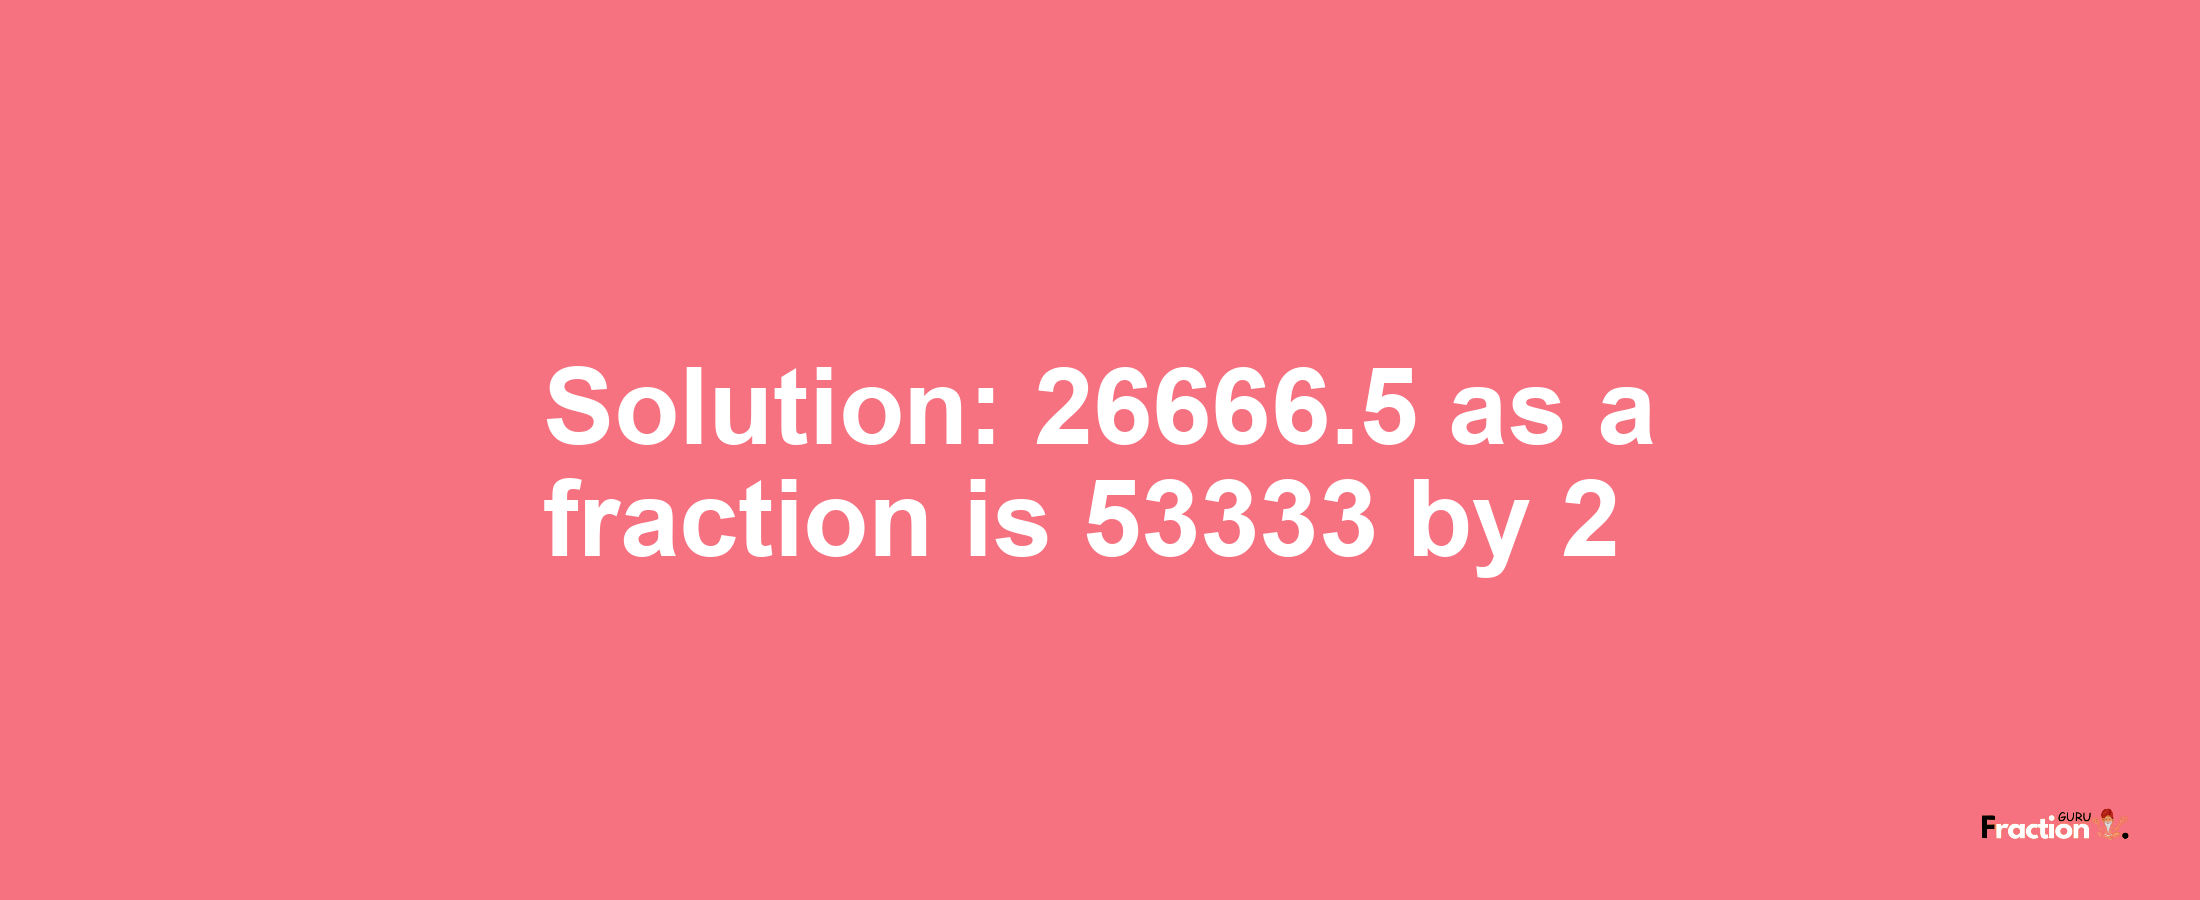 Solution:26666.5 as a fraction is 53333/2